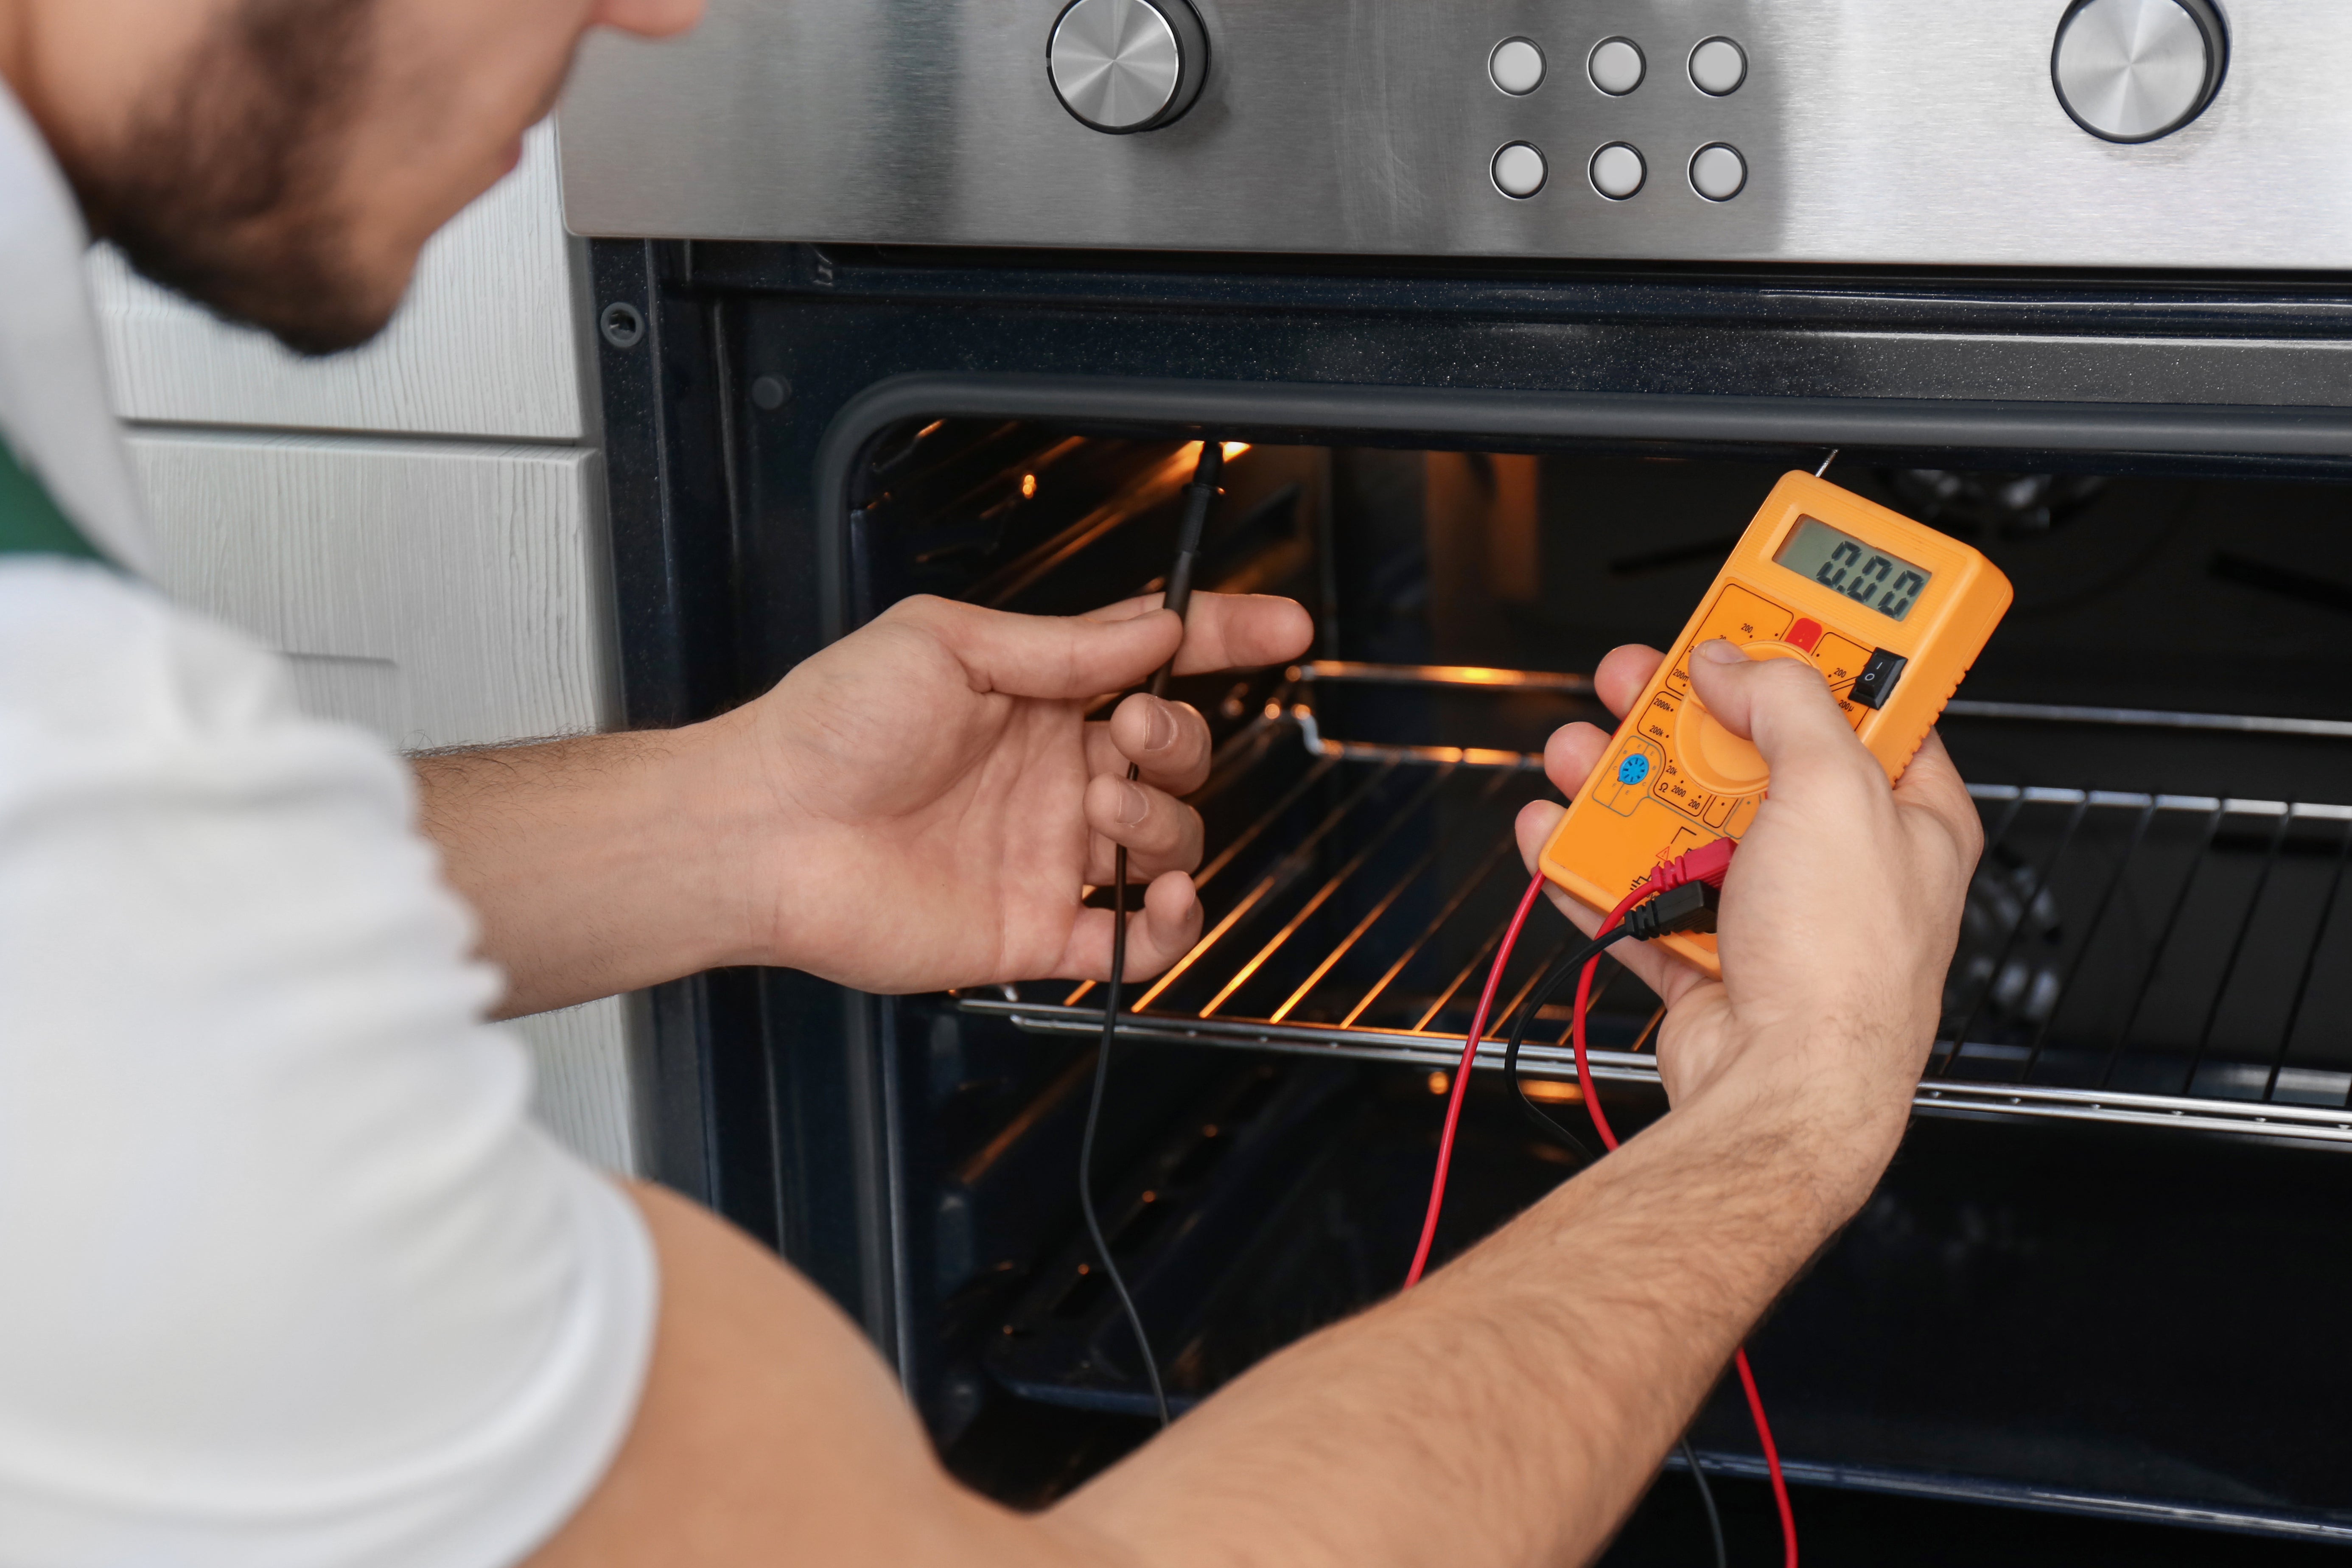 regenval Meisje Omkleden 7 Reasons Your Oven is Not Working and How to Fix the Issues | AHS